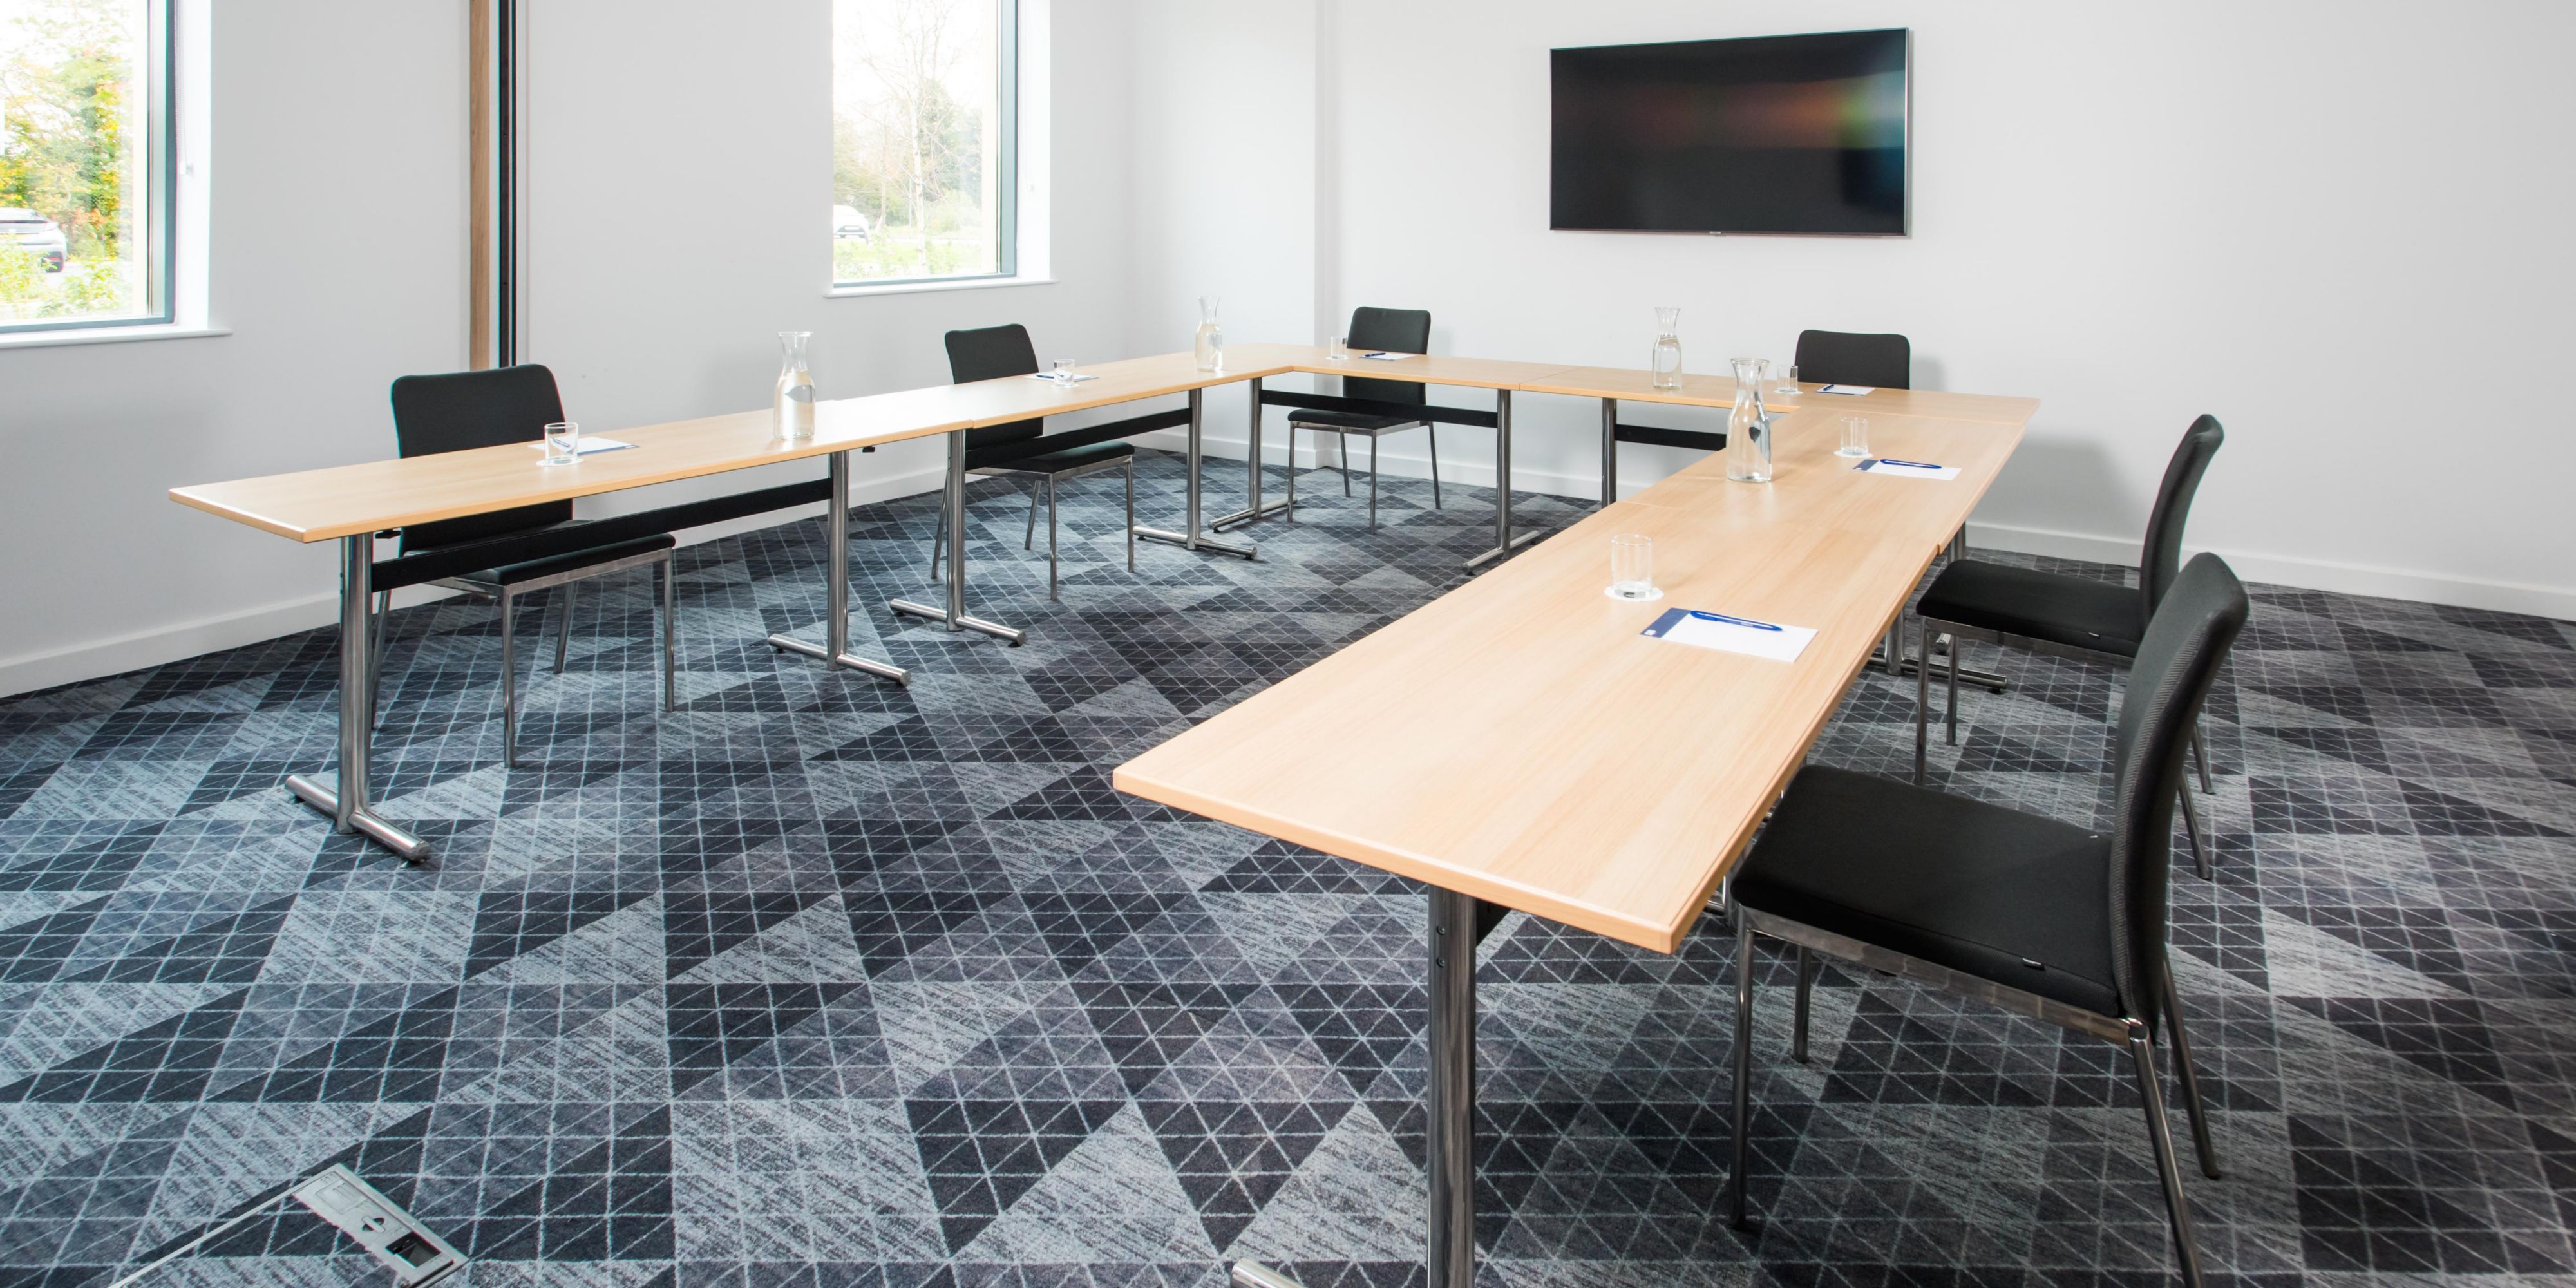 We've got seven air-conditioned ground-floor meeting rooms available to hire for interviews, team meetings and training days. Rooms boast natural daylight, a large TV for presenting and relevant stationery.  